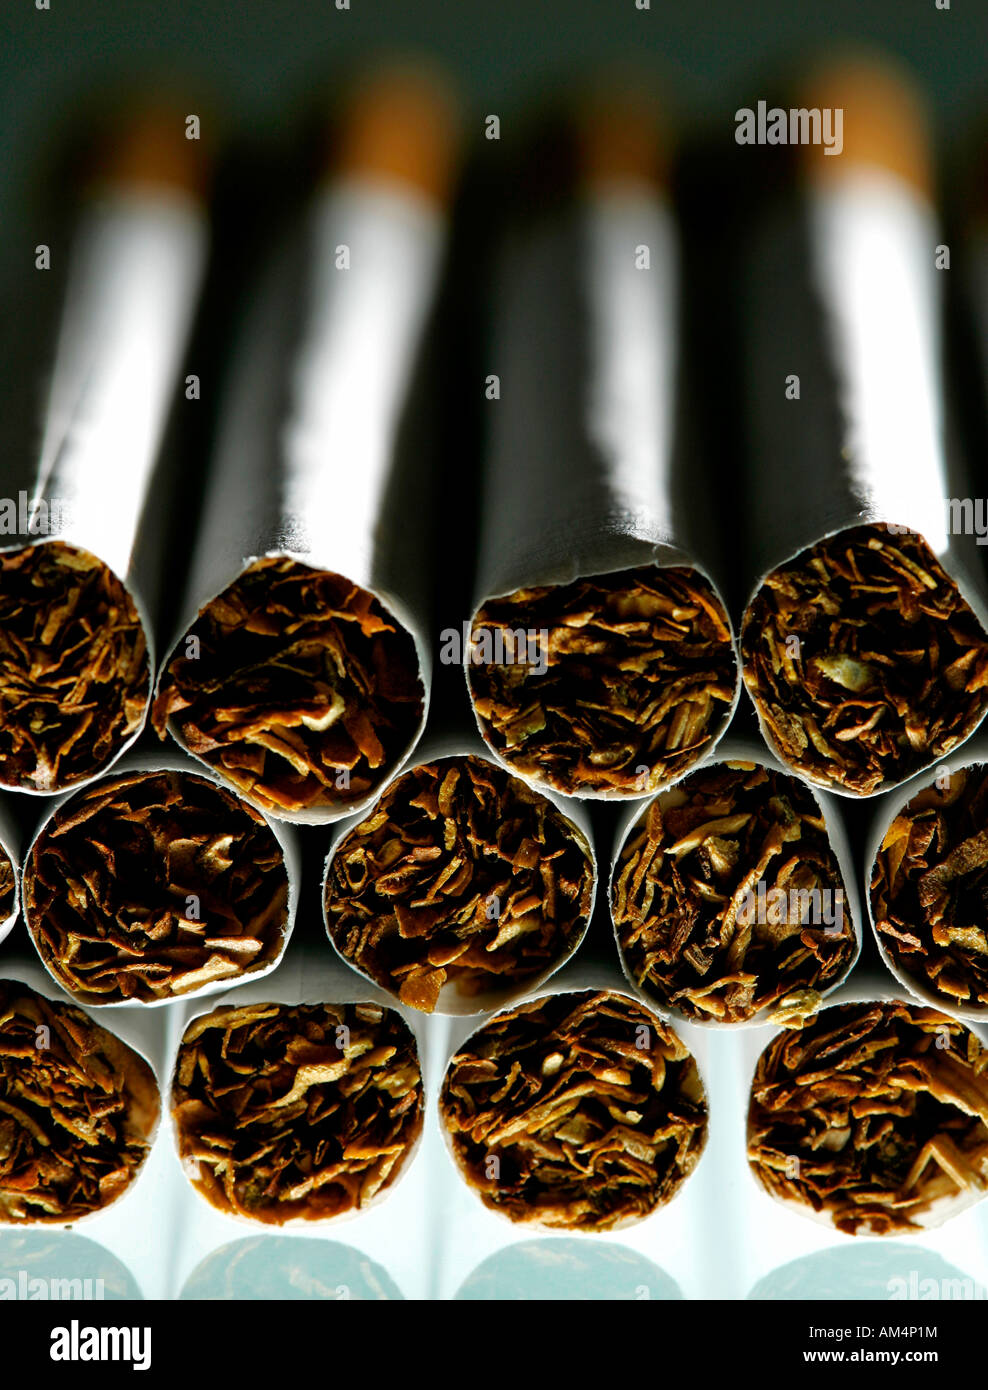 A close-up view of cigarettes Stock Photo